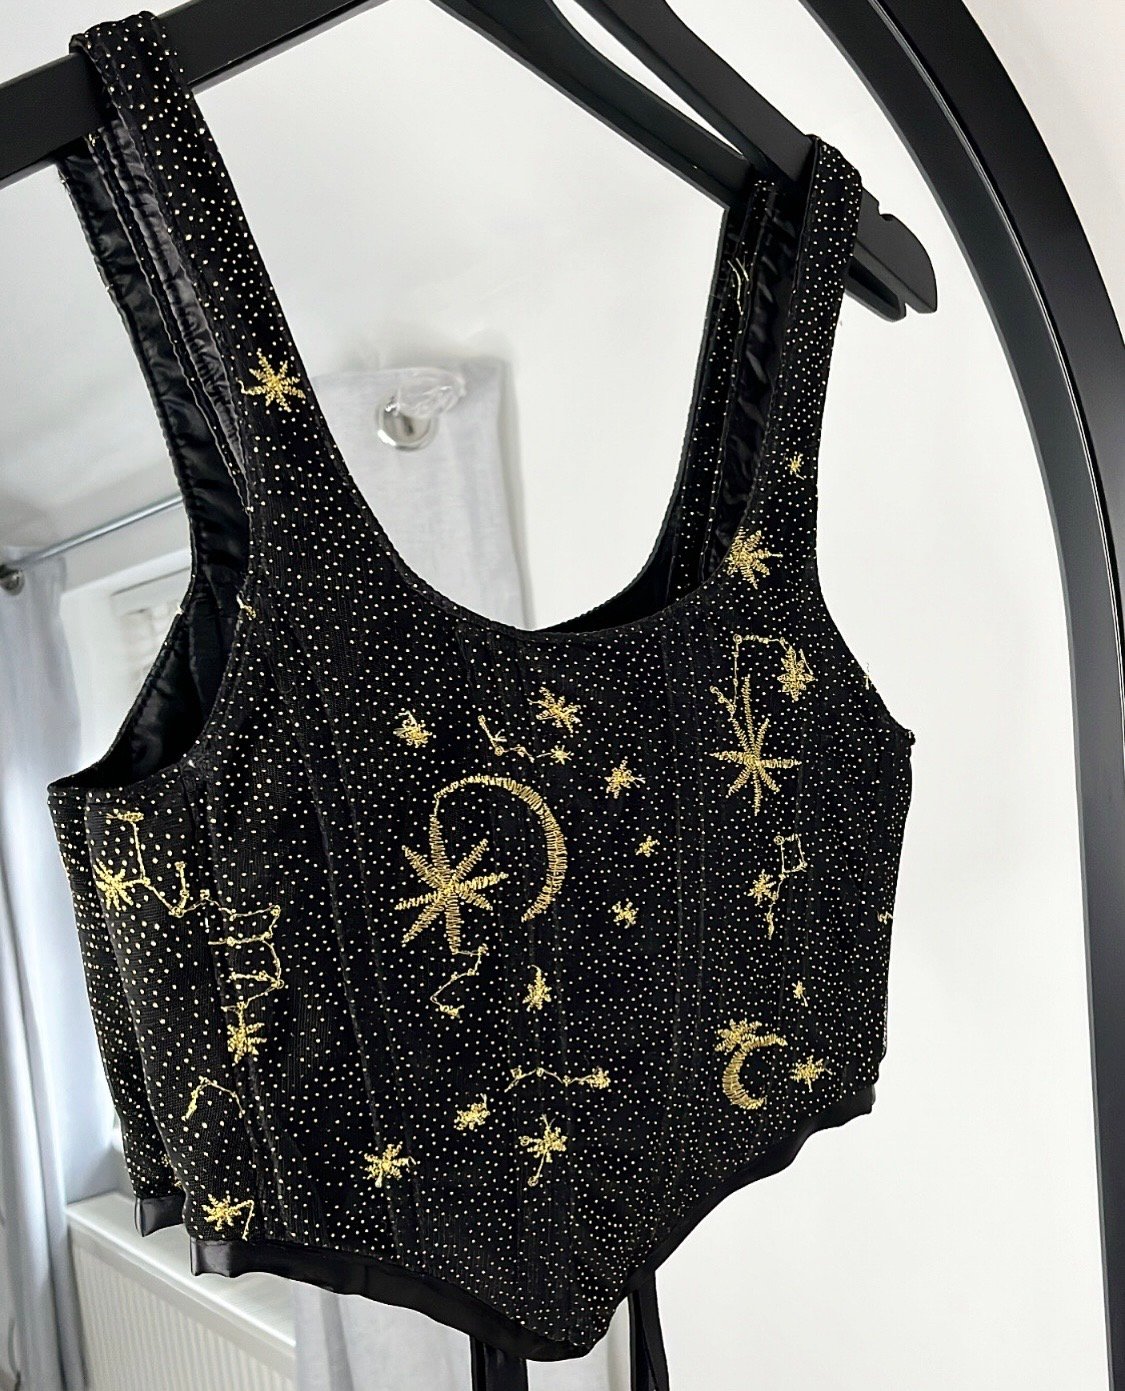 https://assets.bigcartel.com/product_images/82e3add2-2ea2-450e-b334-b485df747806/gold-embroidered-star-and-moon-corset.jpg?auto=format&fit=max